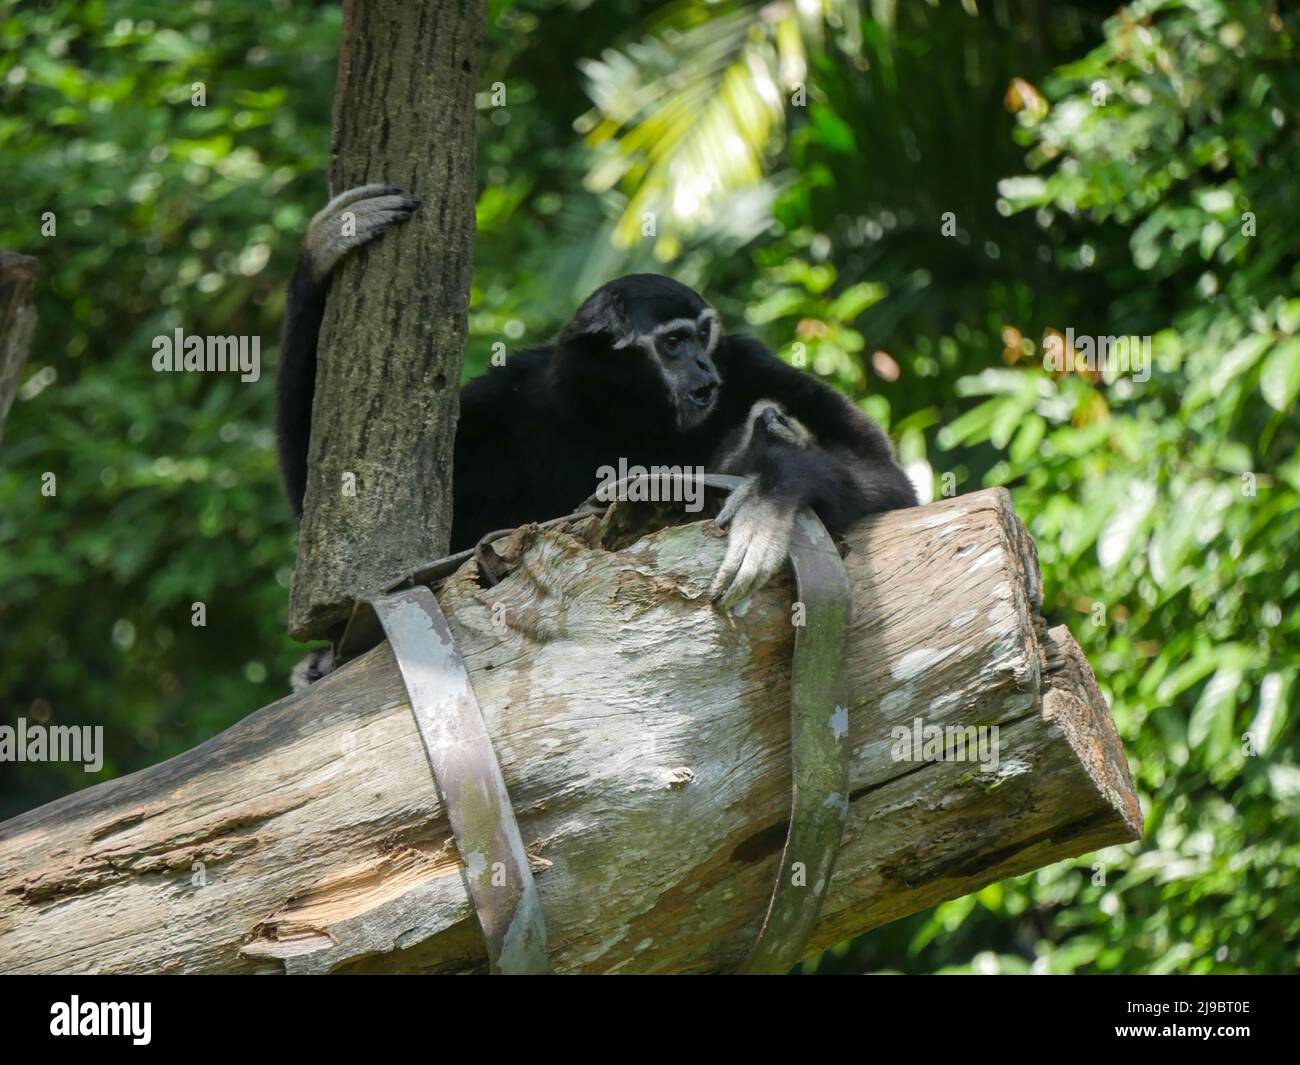 Black-And-White Colobus Monkey : Black-and-white colobuses (or colobi) are Old World monkeys of the genus Colobus, native to Africa. They are closely Stock Photo